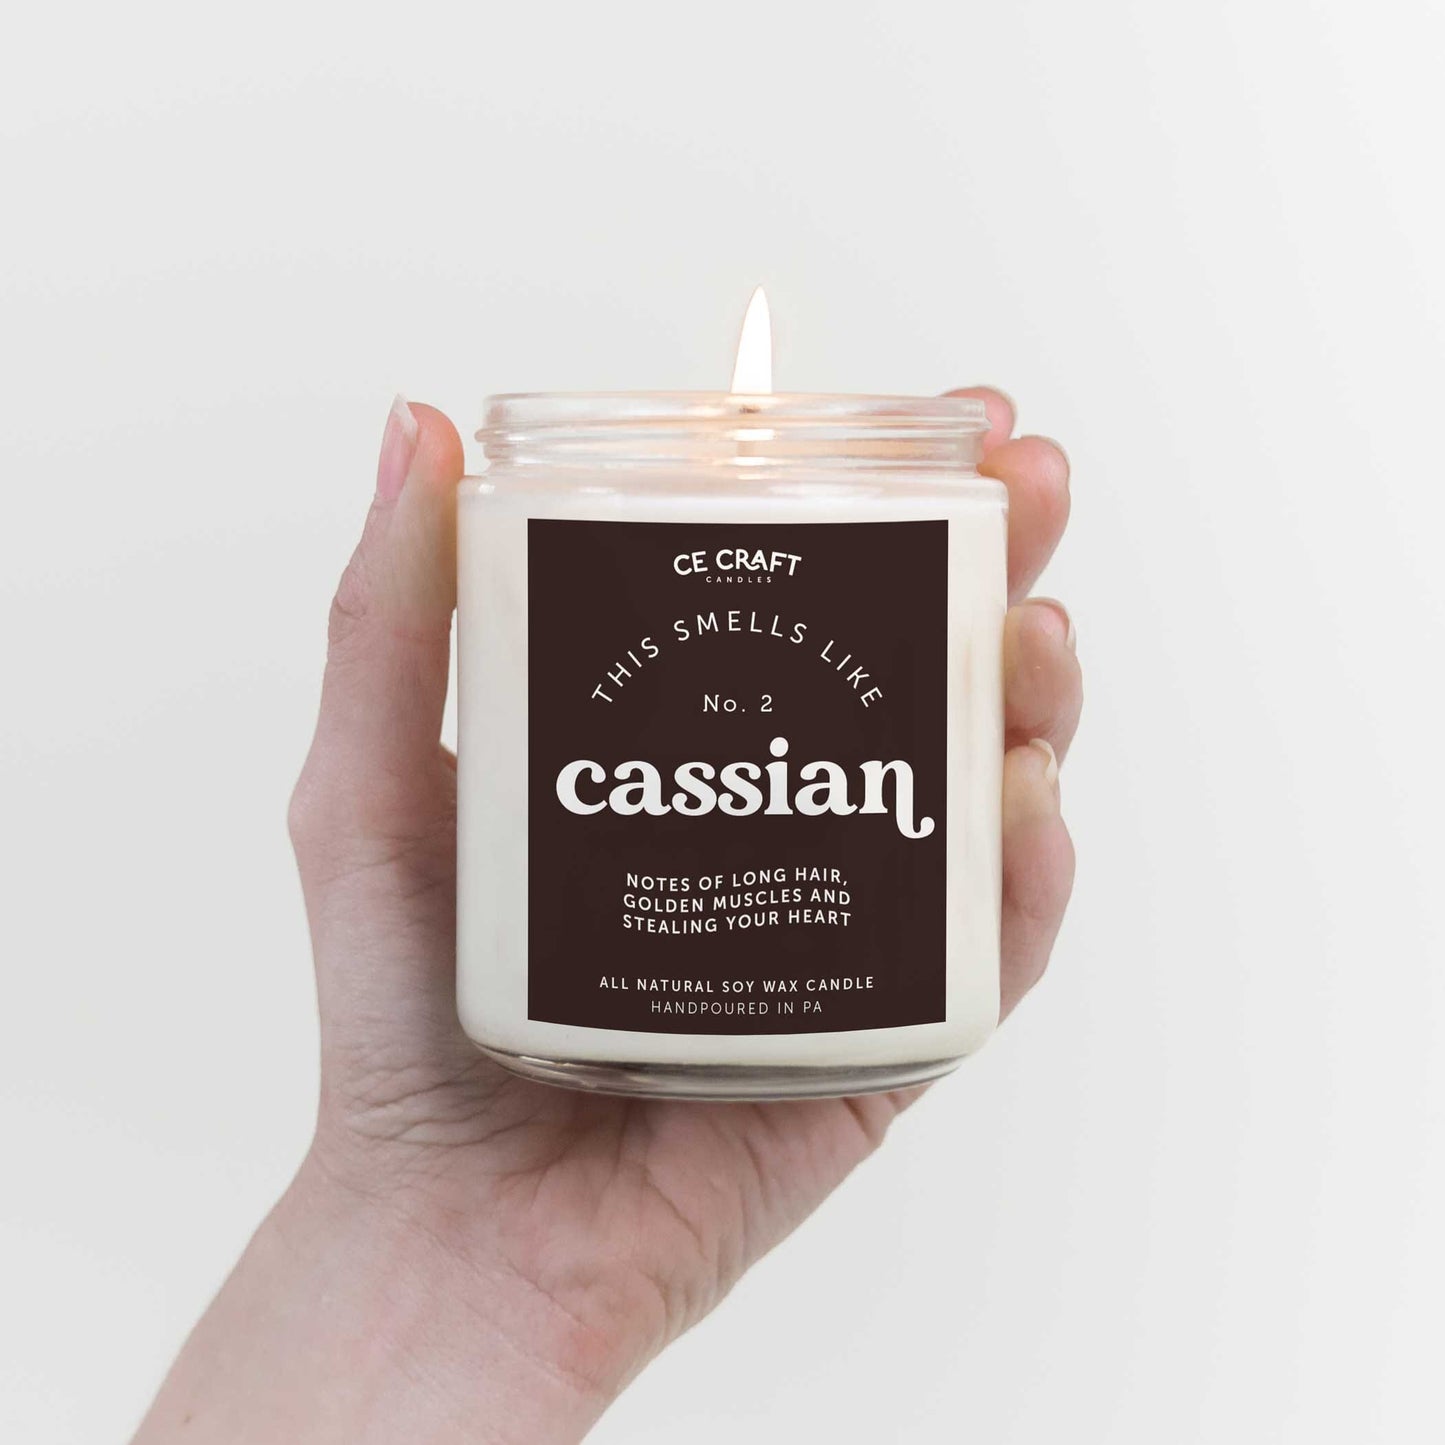 This Smells Like Cassian Candle CE Craft Standard 